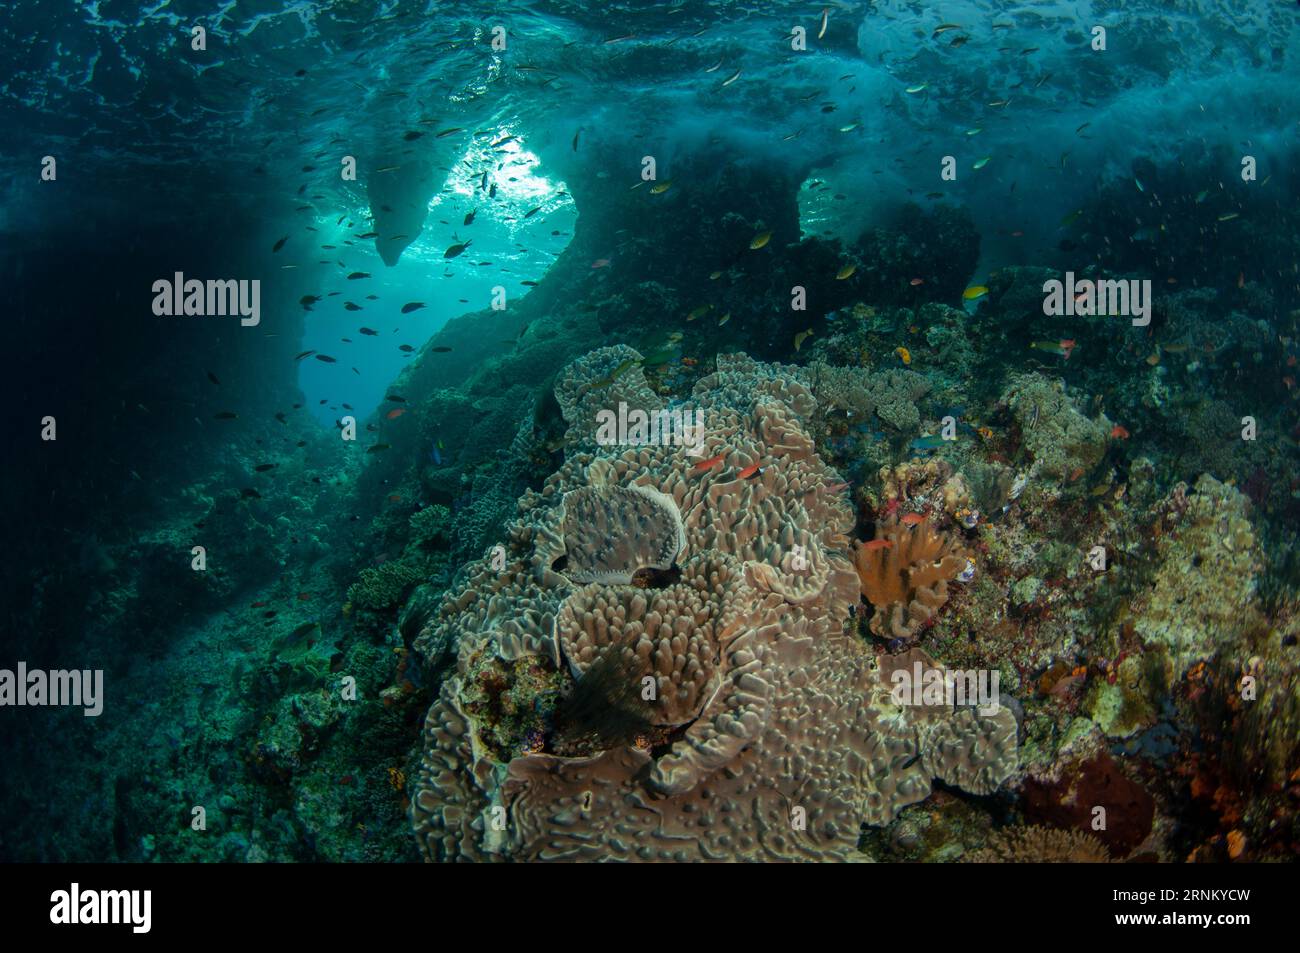 View of window with Leather Coral, Lobophytum sp, and fish, Boo Window dive site, Boo Island, Misool, Raja Ampat, West Papua, Indonesia Stock Photo